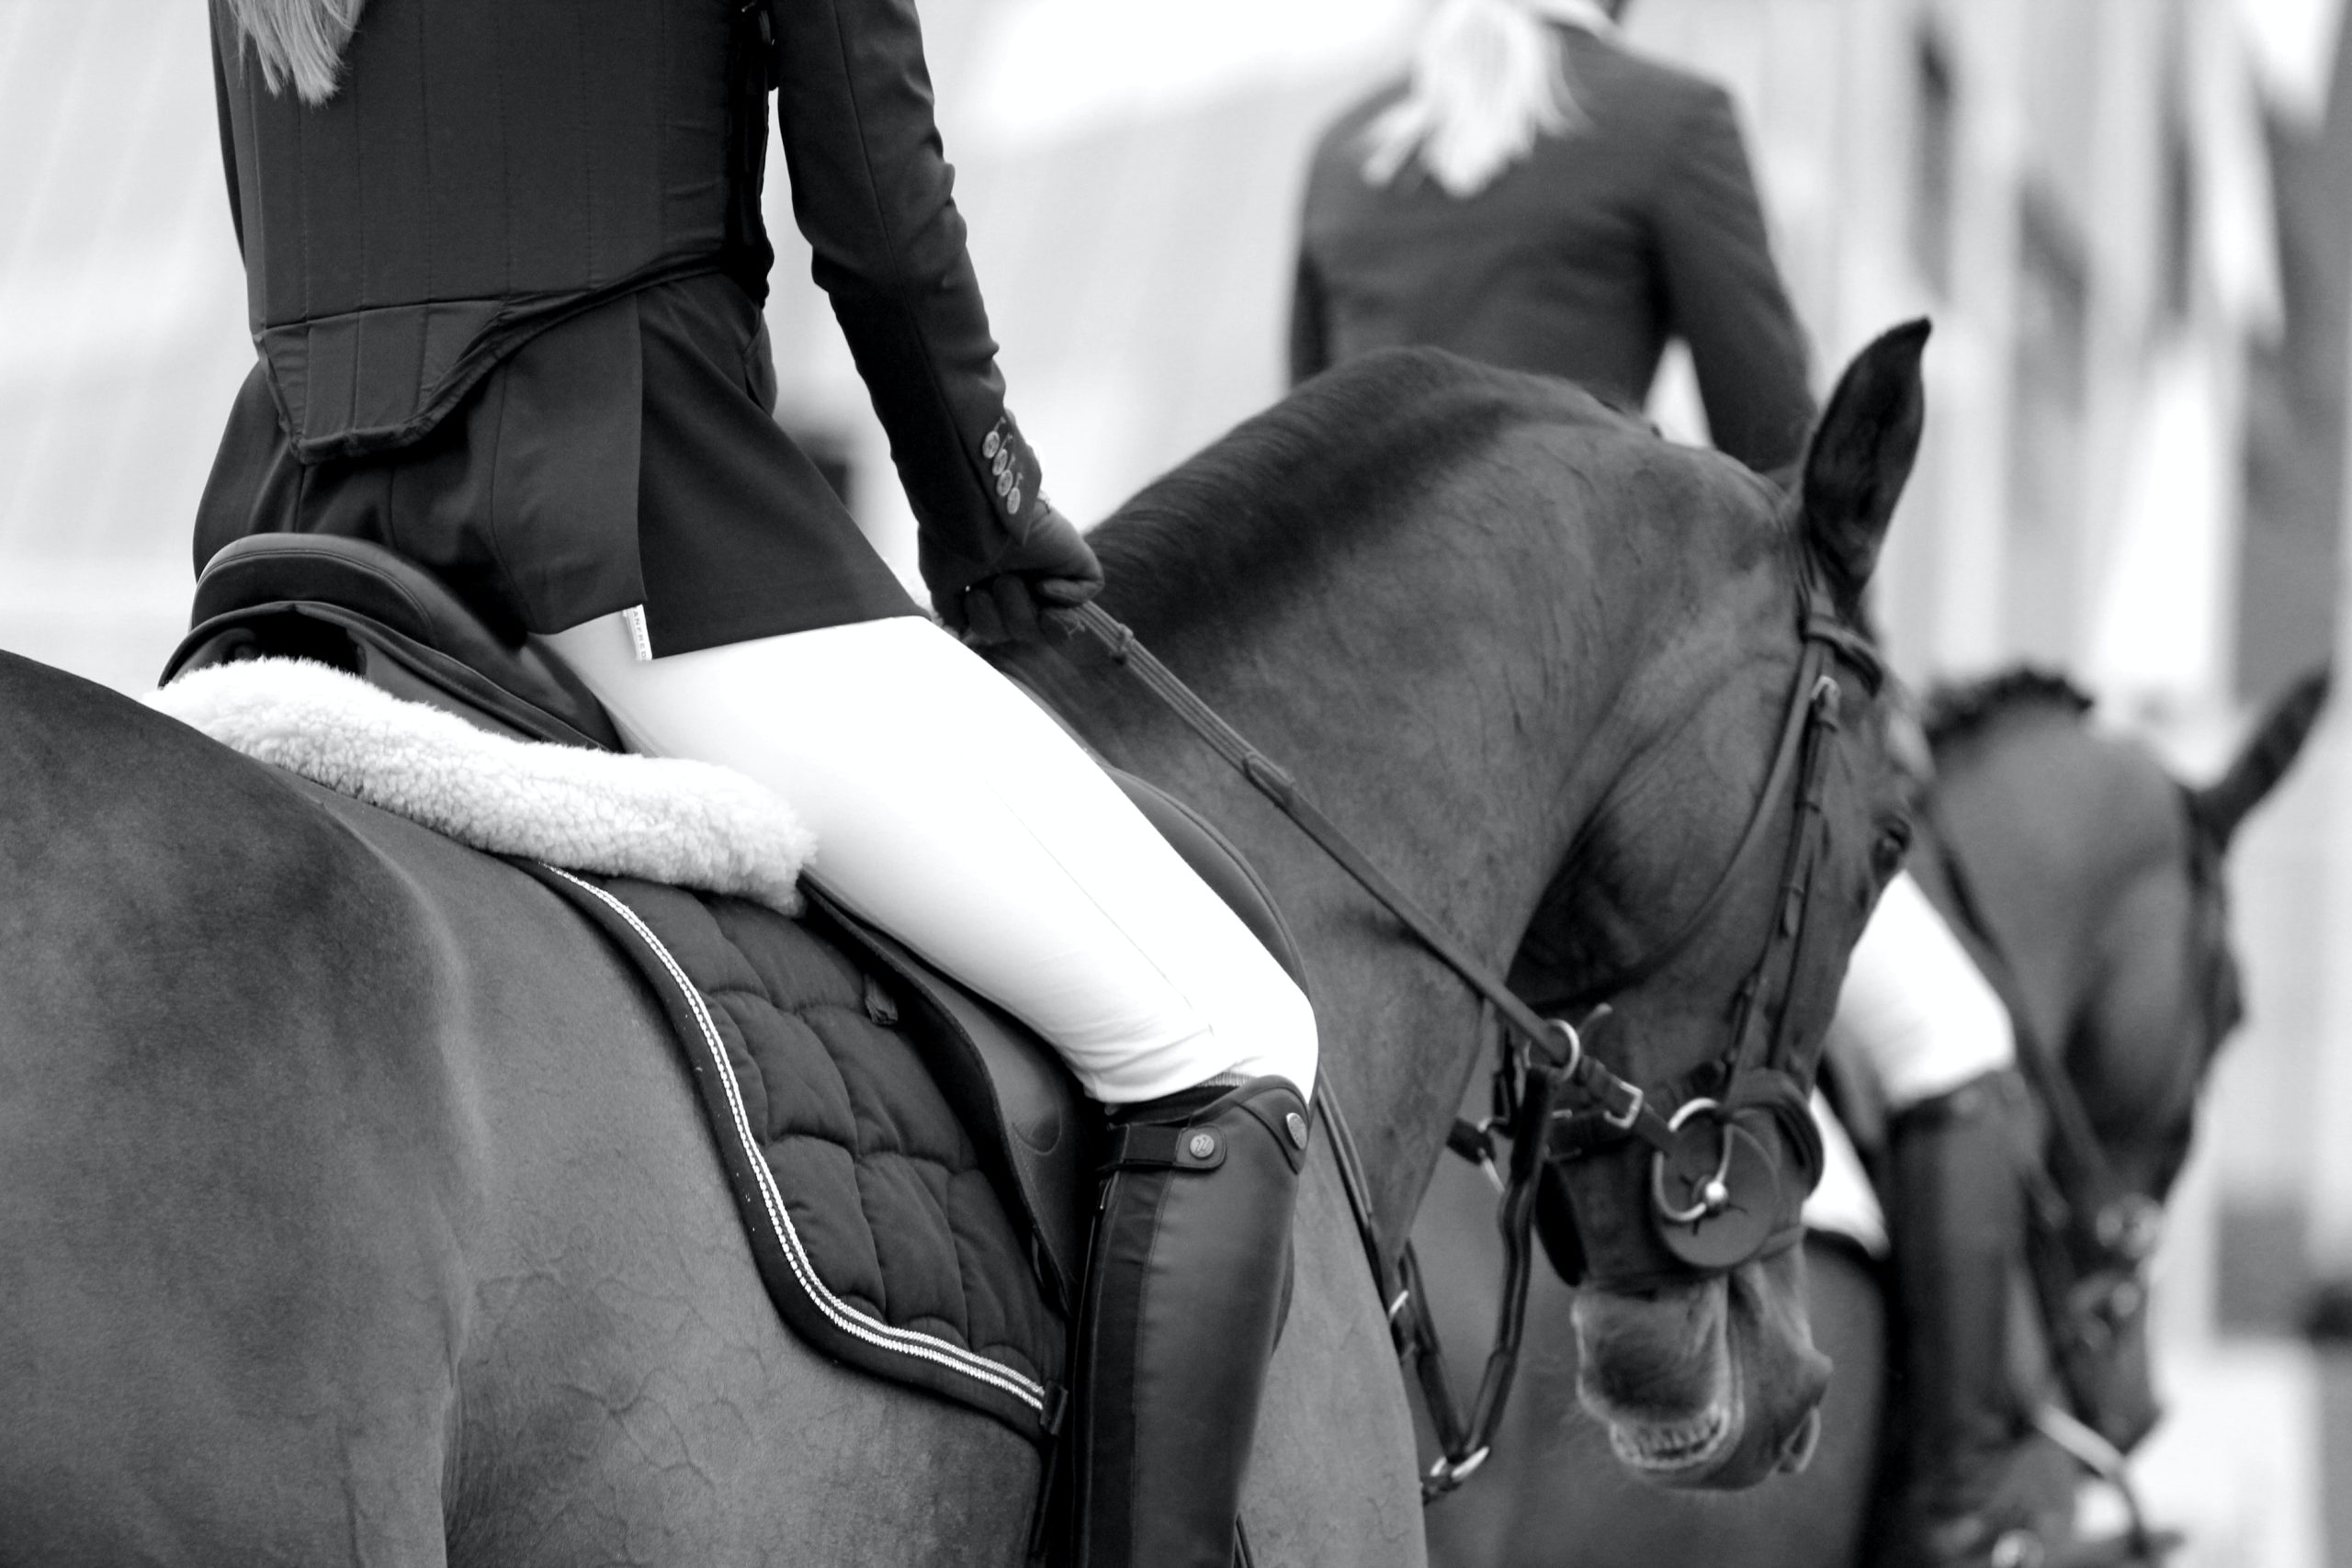 Guide to Equestrian Colleges (and how to secure a scholarship or spot on the team)